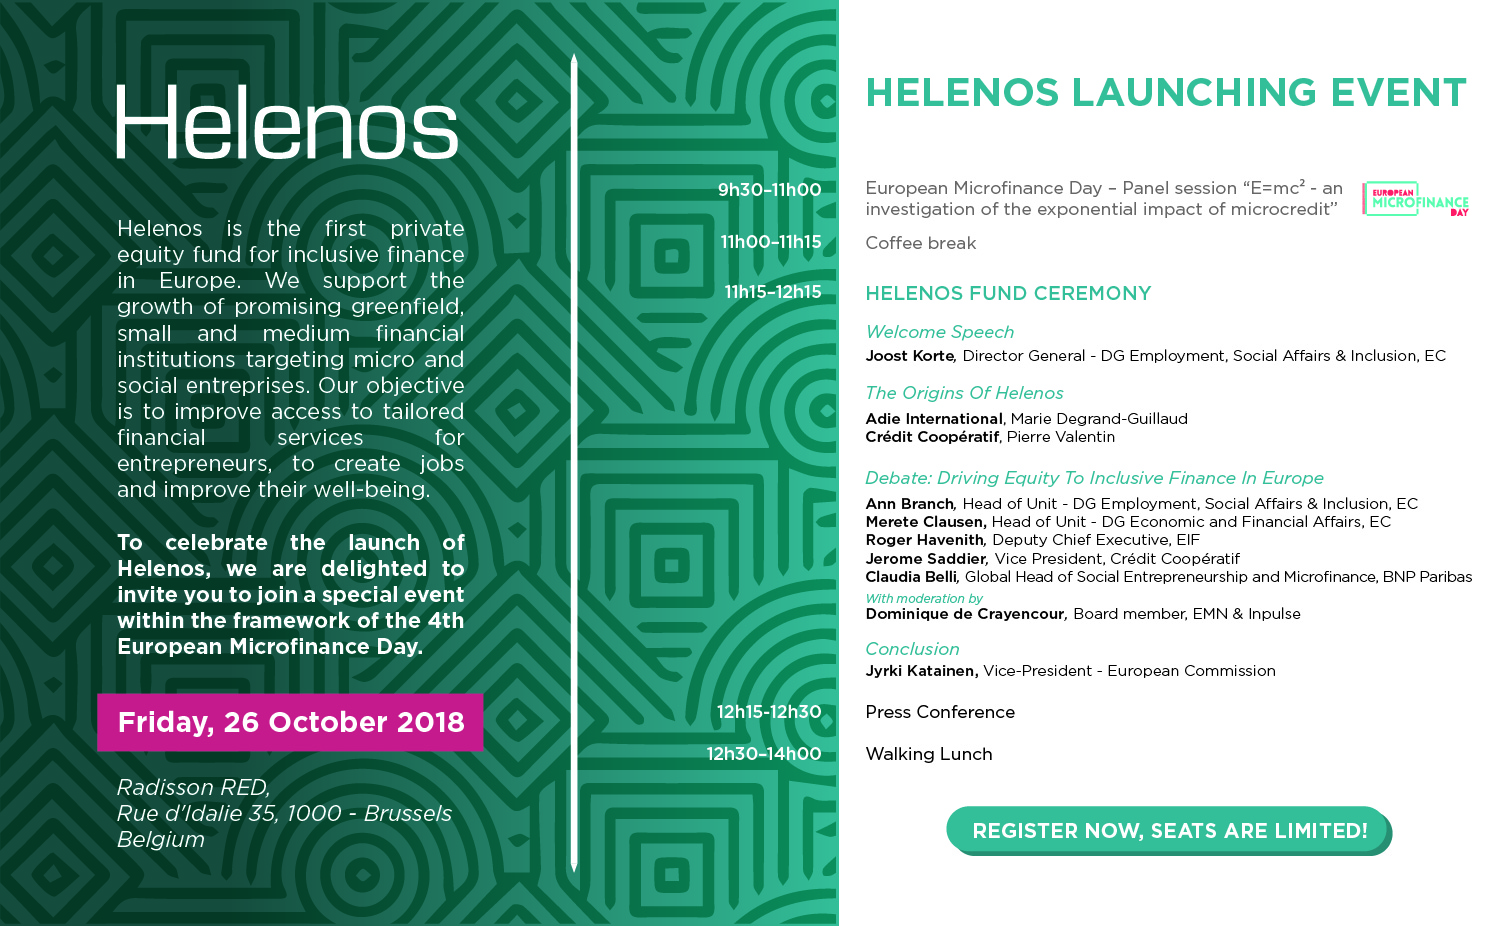 HELENOS LAUNCHING EVENT, 26 OCTOBER, BRUSSELS – KEYNOTE SPEECH BY EUROPEAN COMMISSION VICE-PRESIDENT KATAINEN